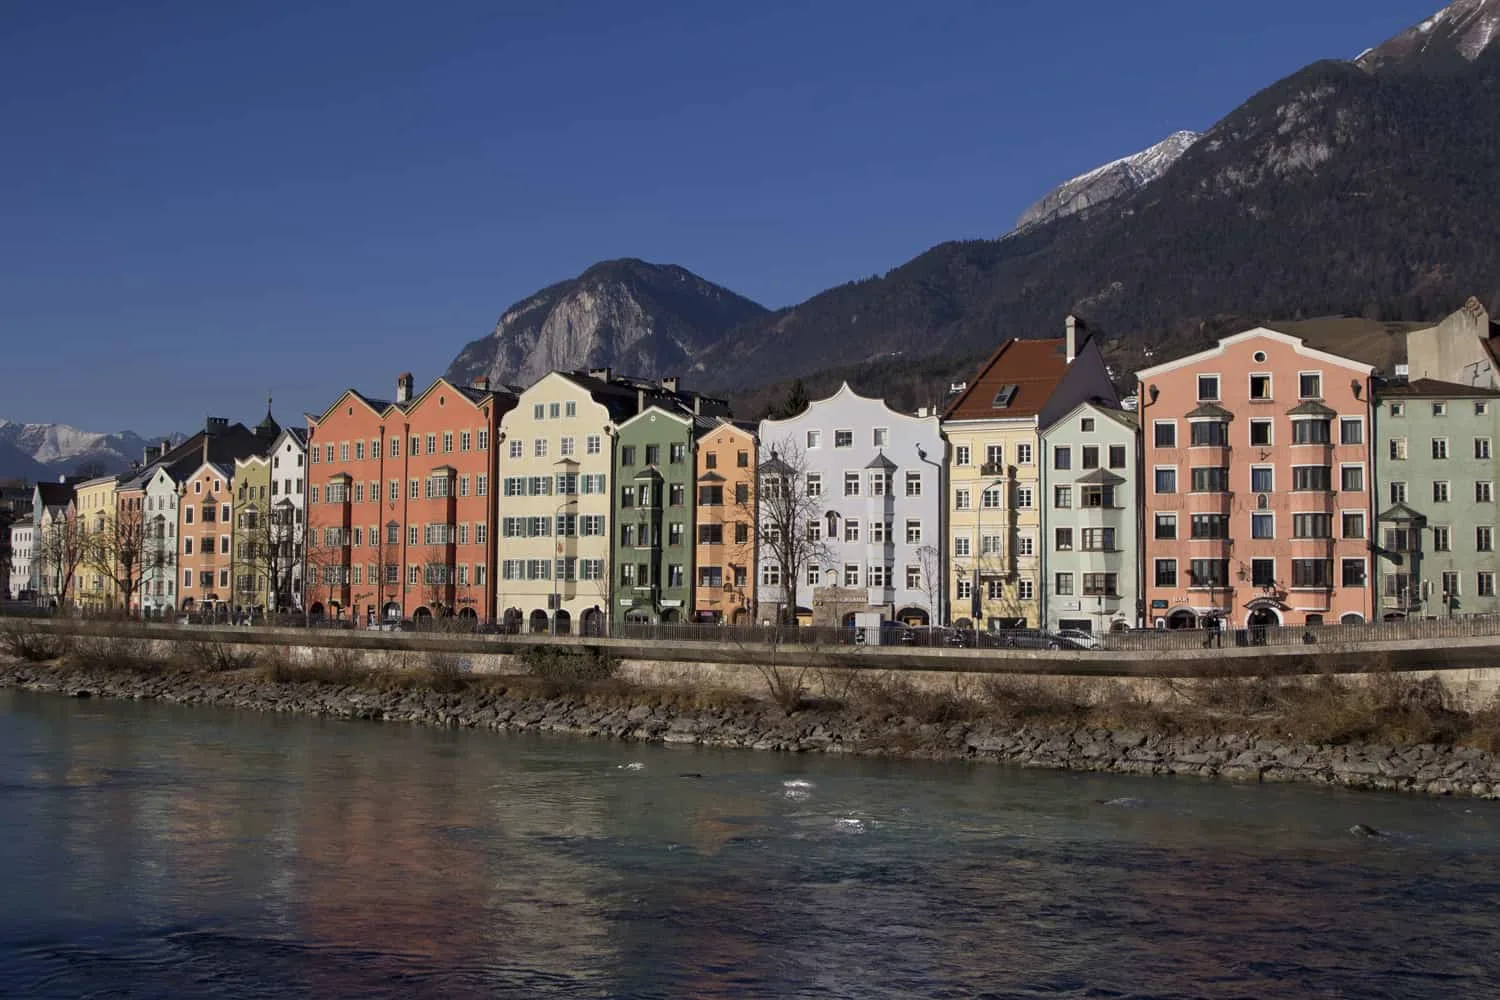 Some of the charming architecture you will find in Innsbruck, Austria.